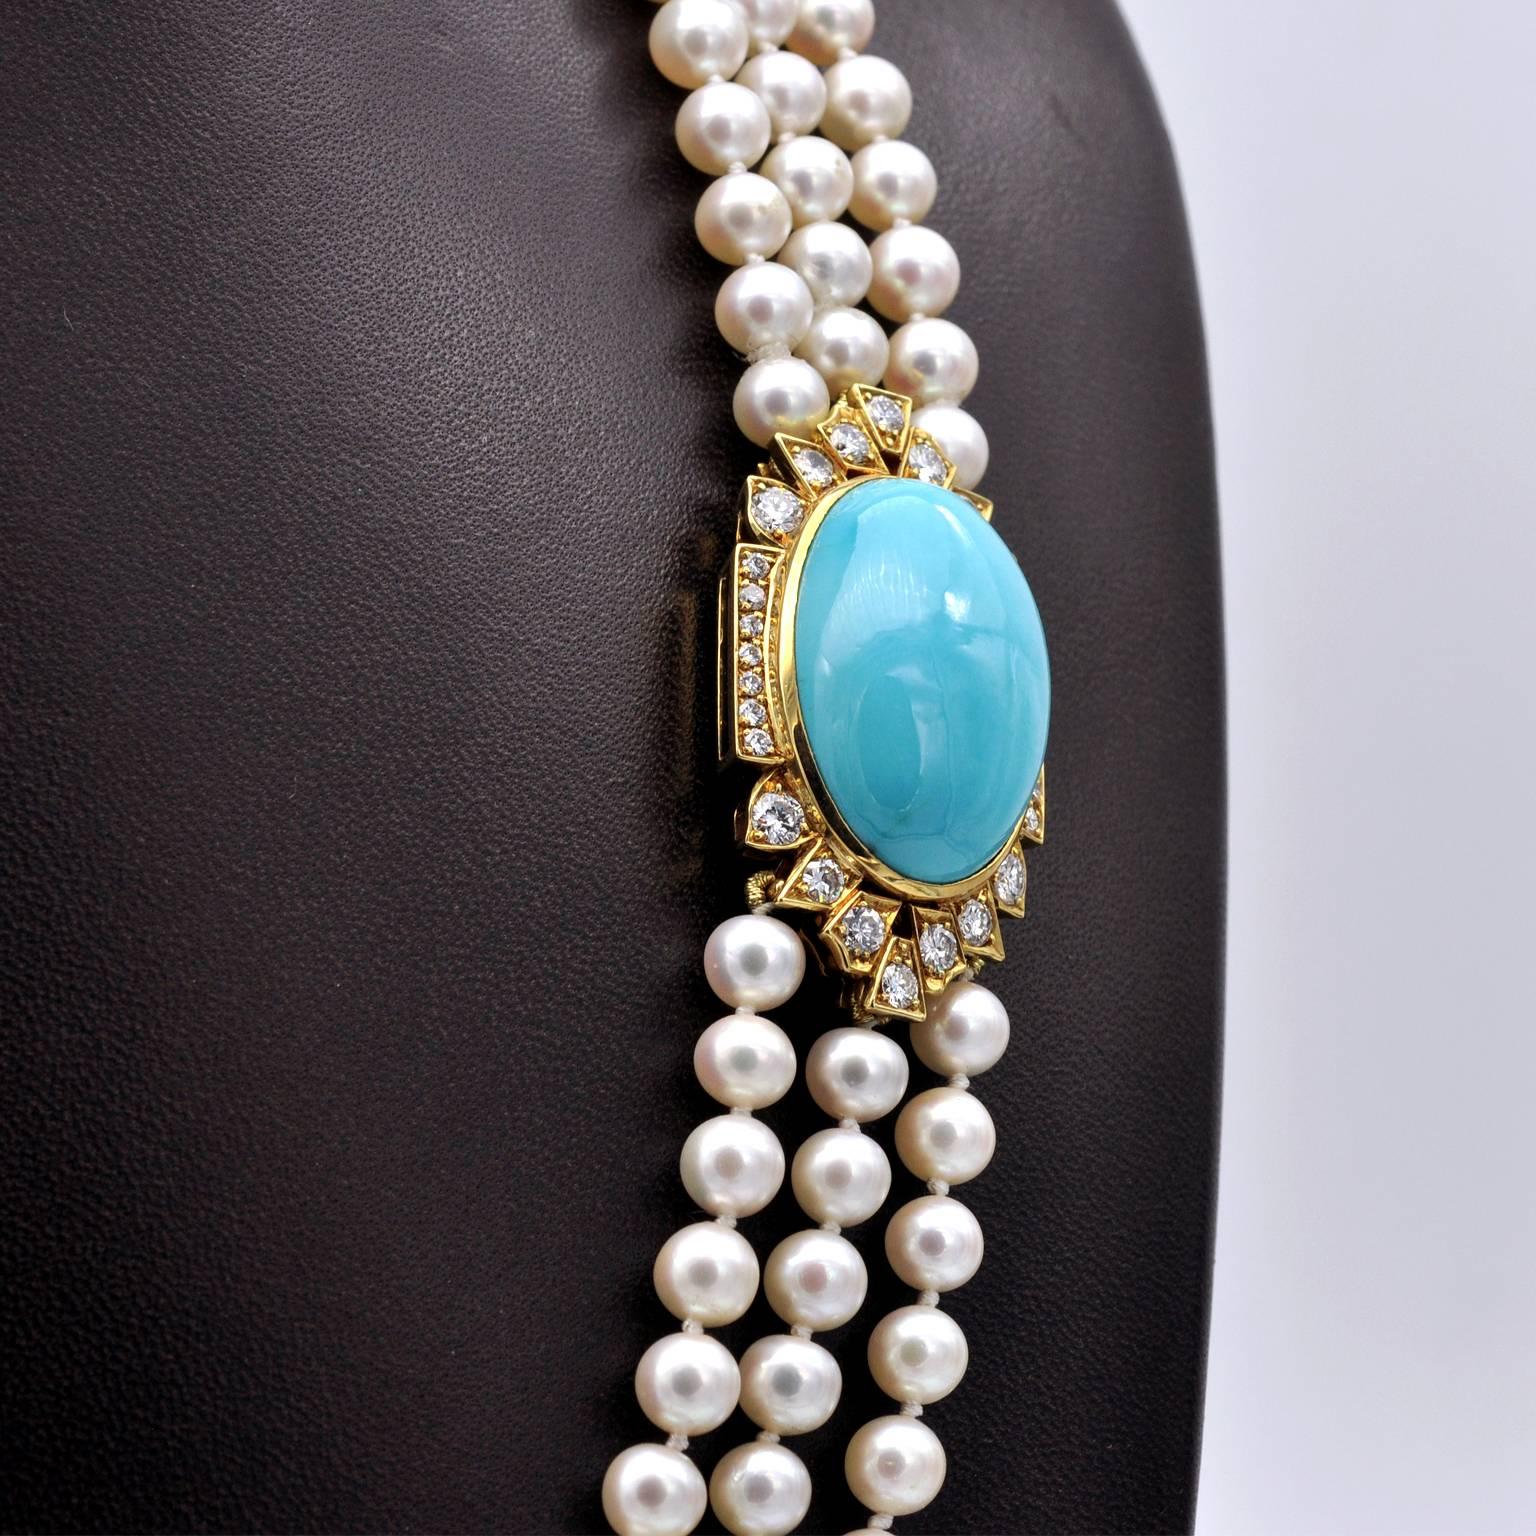 Very elegant opera necklace: thee stands of white peals closing with a yellow gold clasp which is also the adornment of this piece. It consists of a 27mm long turquoise set in yellow gold and surrounded with approximately 2.2 carats of top quality